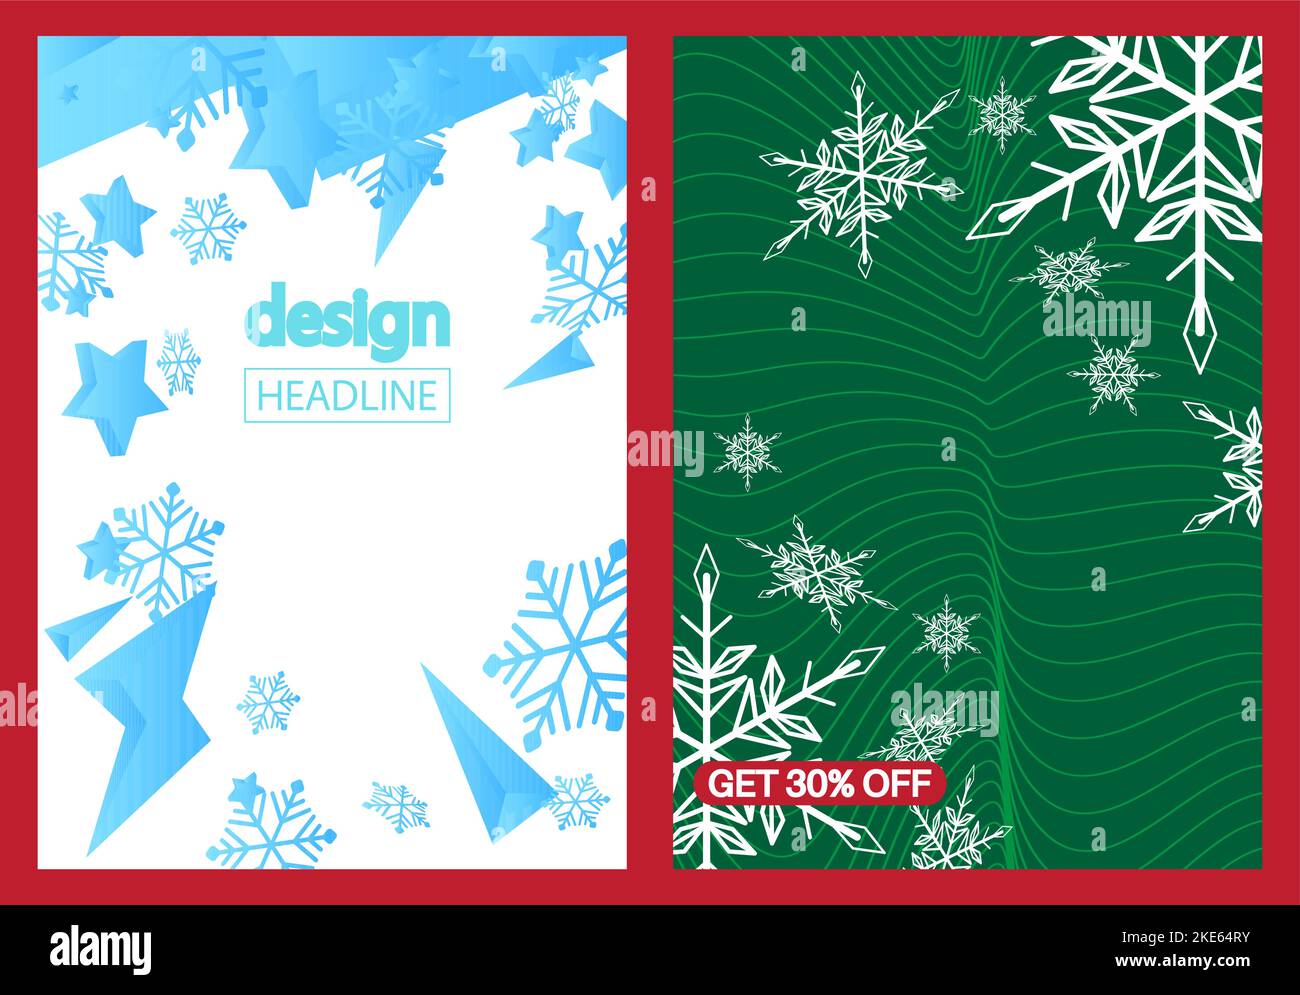 Snowflake template design. Special deal, Christmas season offer poster. Winter Vector illustration. Holiday Clearance, Discount Banner. Business, Stor Stock Vector